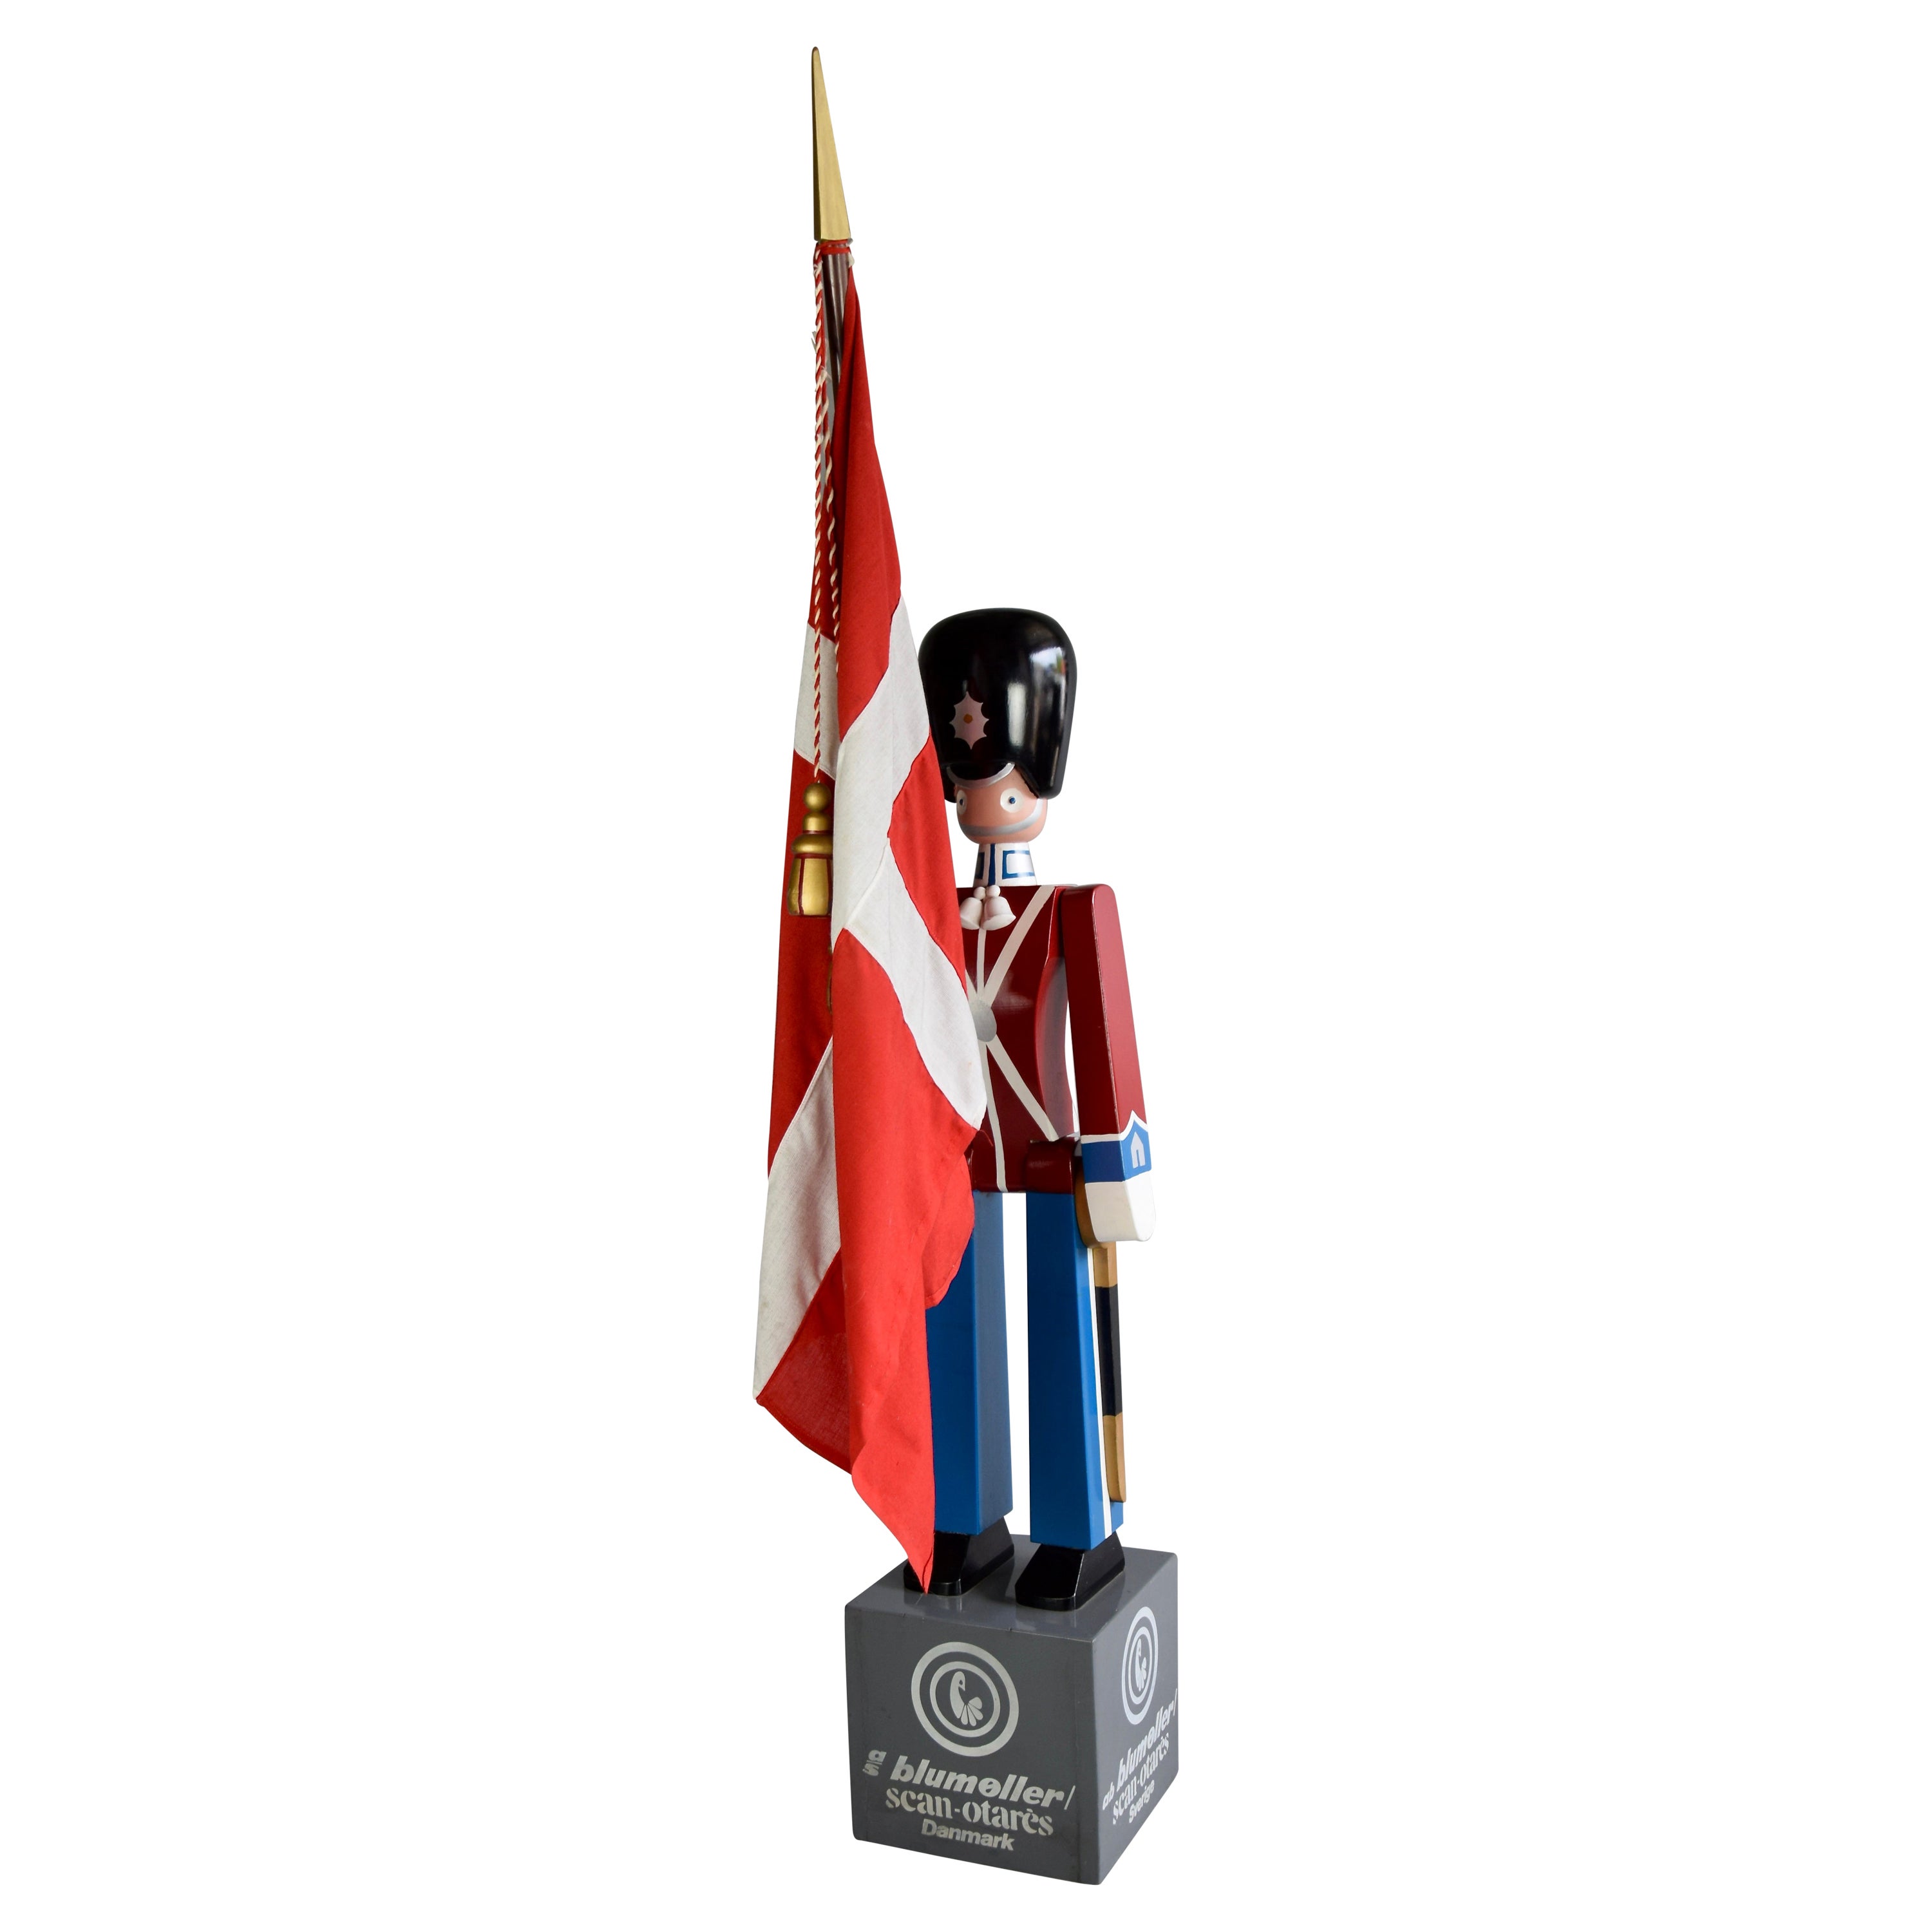 Giant-Sized King's Guardsman by Kay Bojesen For Sale